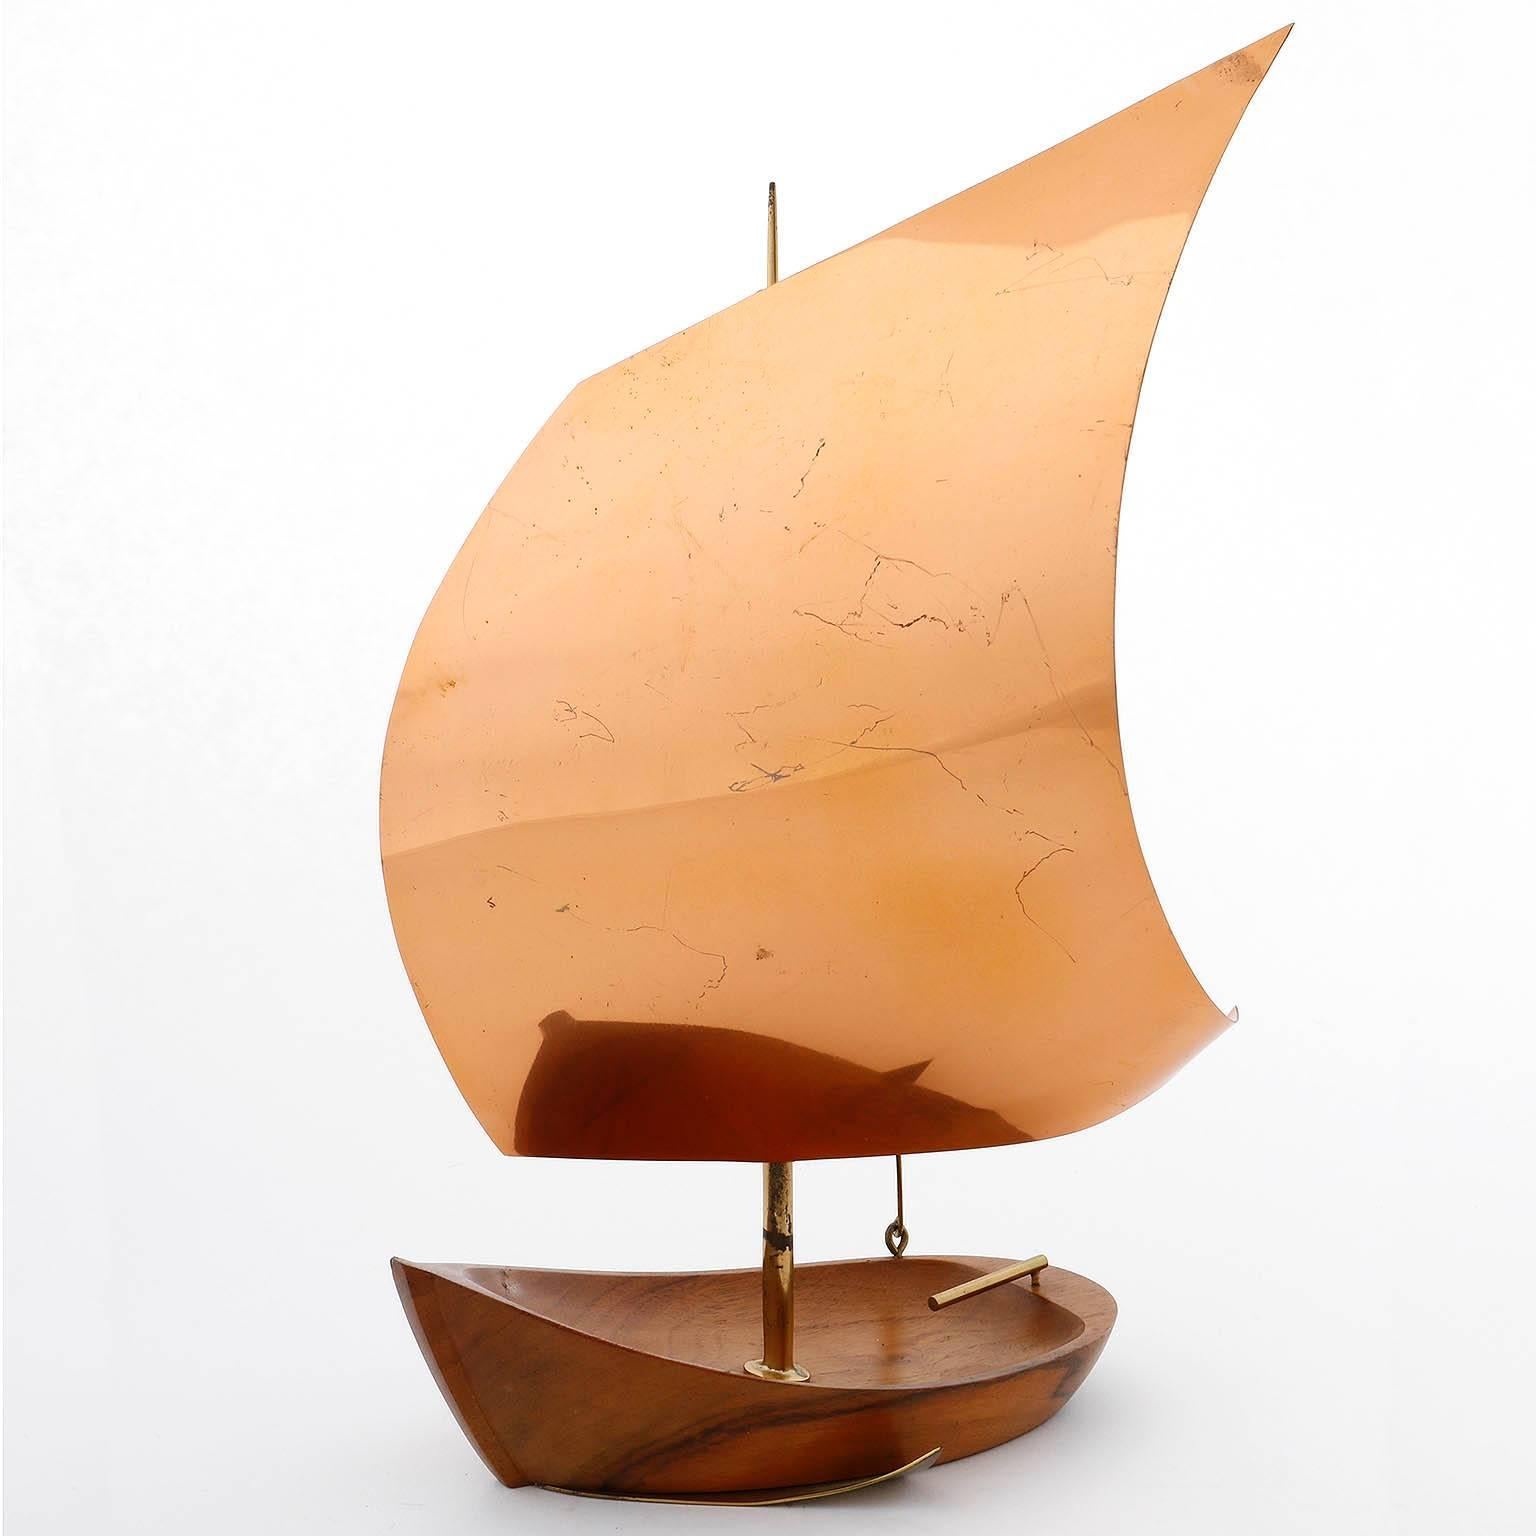 A sailing boat made of wood, copper and brass by Franz Hagenauer, Austria, Vienna, 1950.
It is stamped at the underside with 